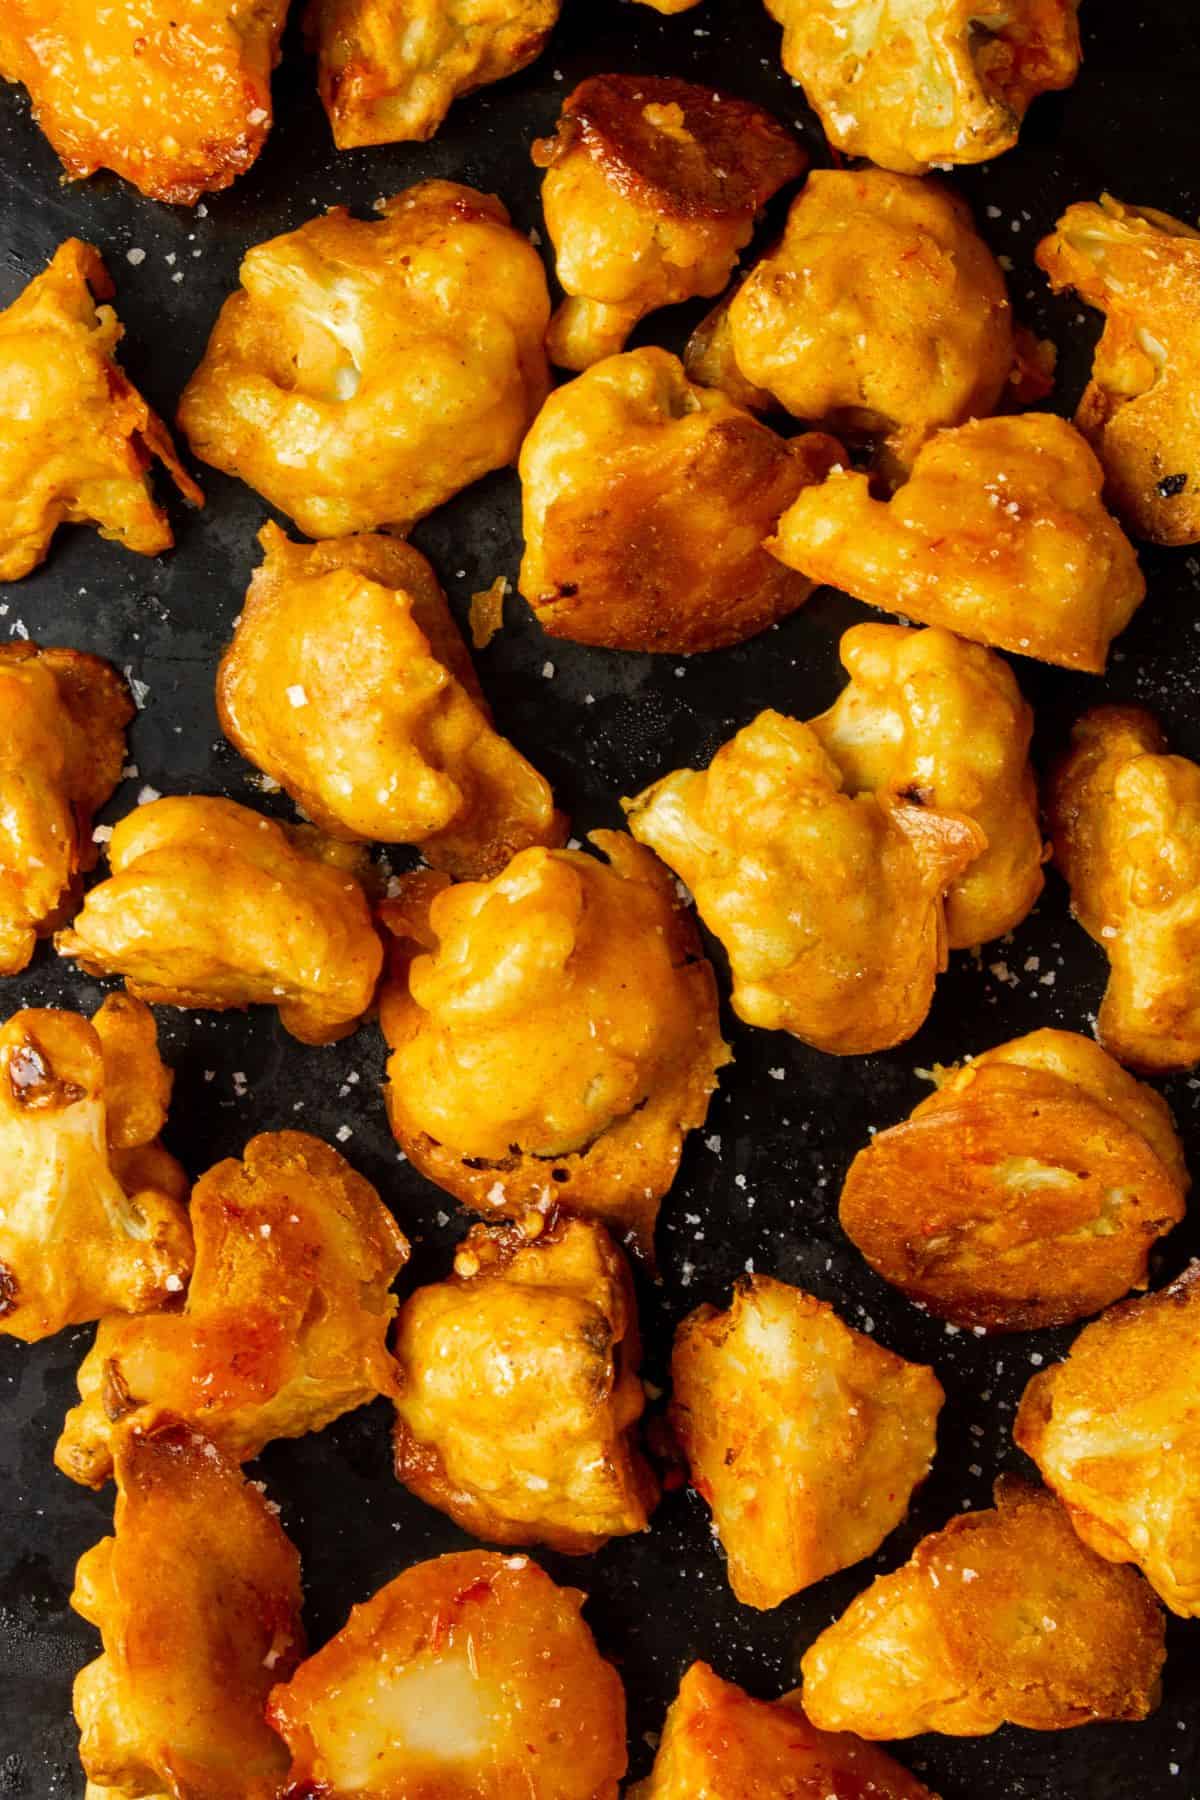 Golden browned cauliflower bites on a black baking tray